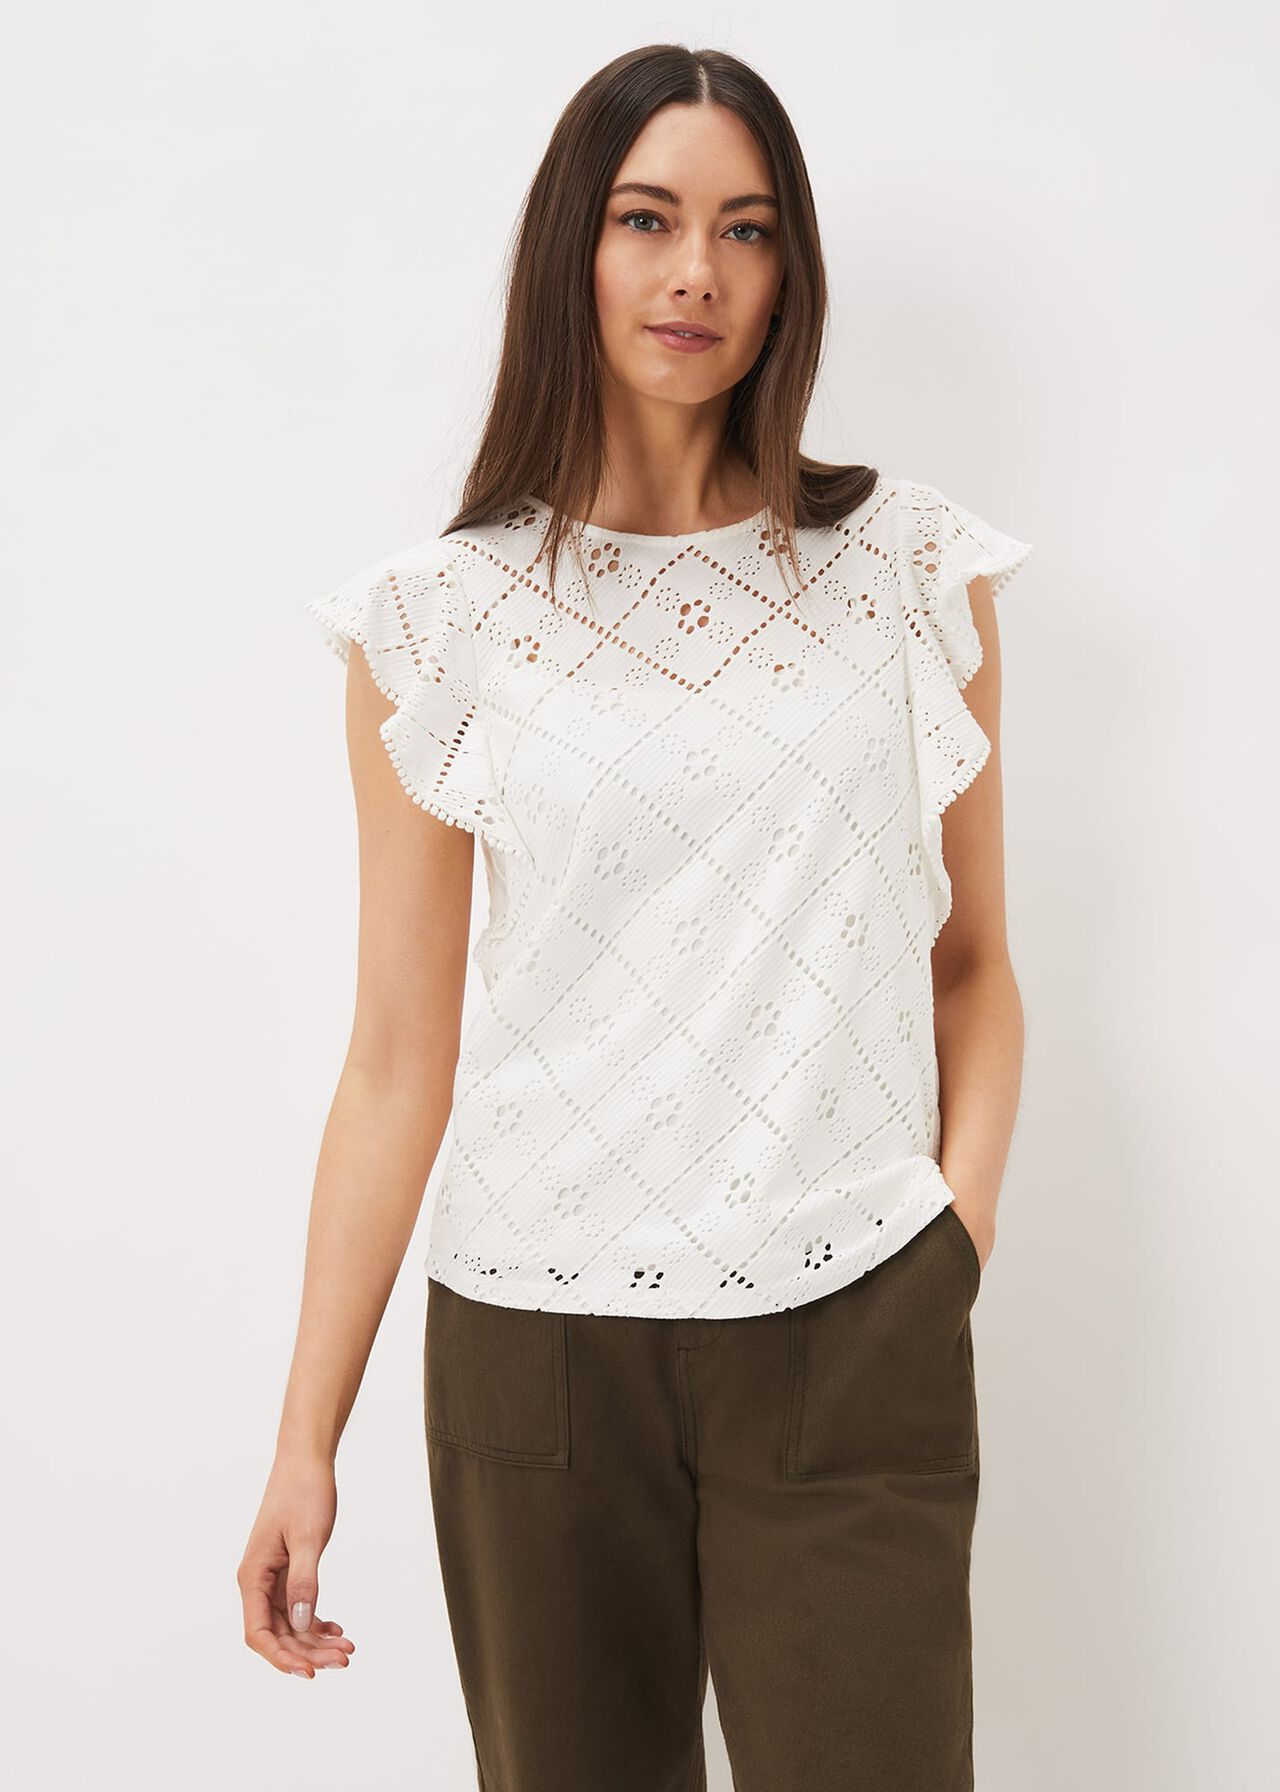 Guilana Cotton Frill Lace Top